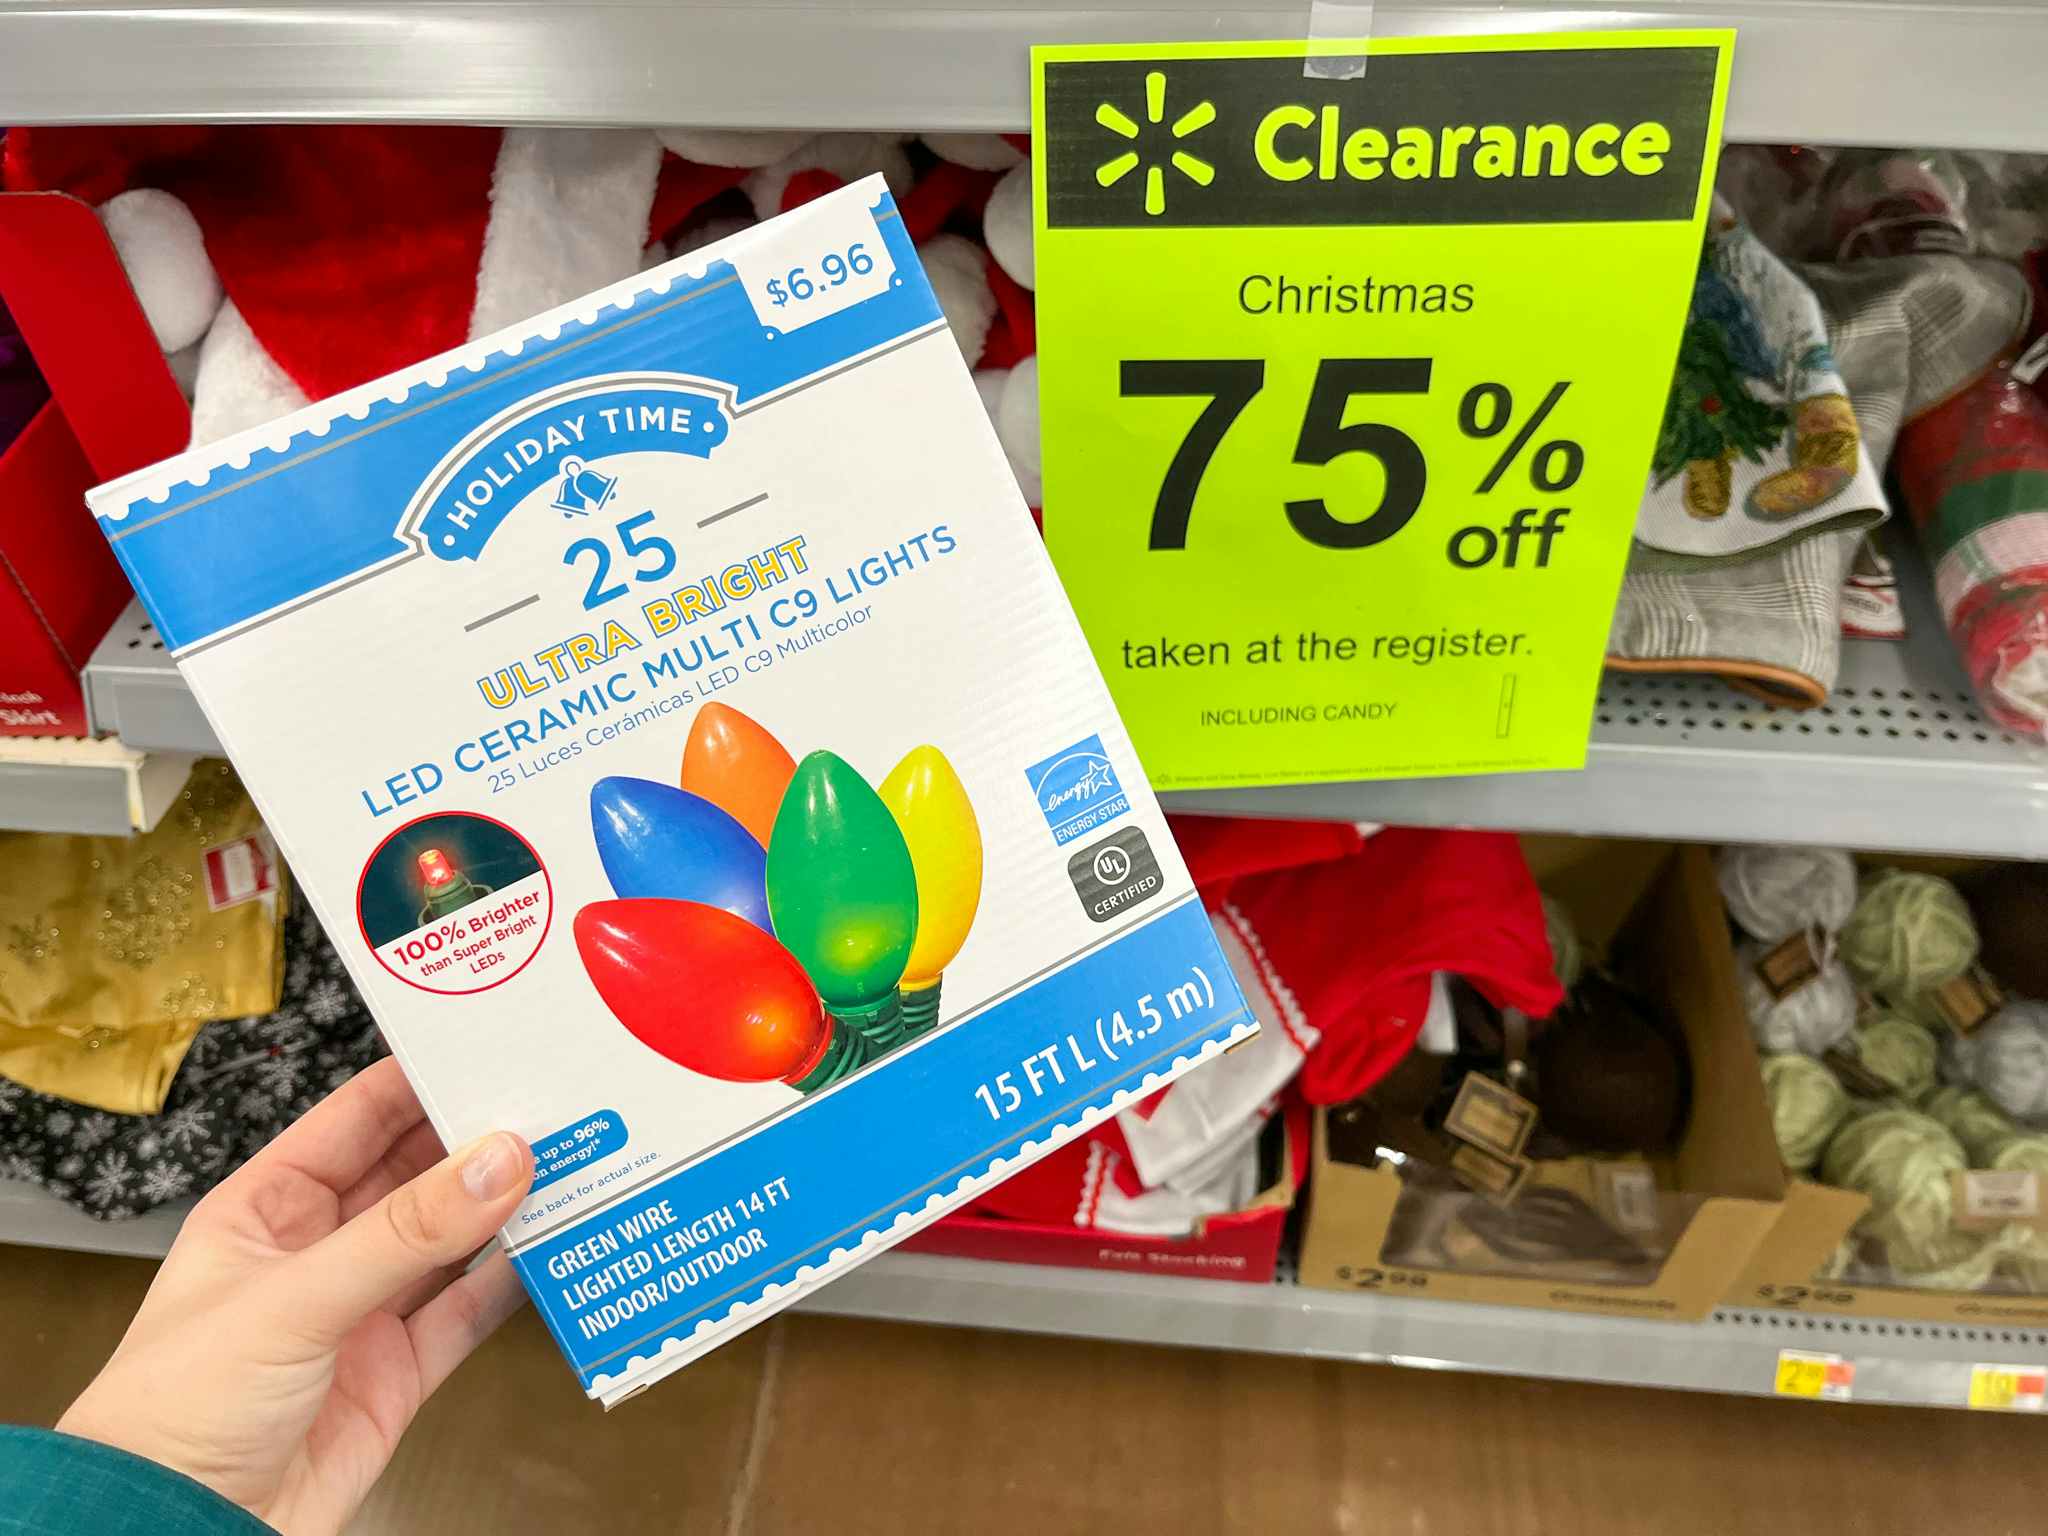 Sterilite Ornament Case Possibly Only $1.50 at Walmart